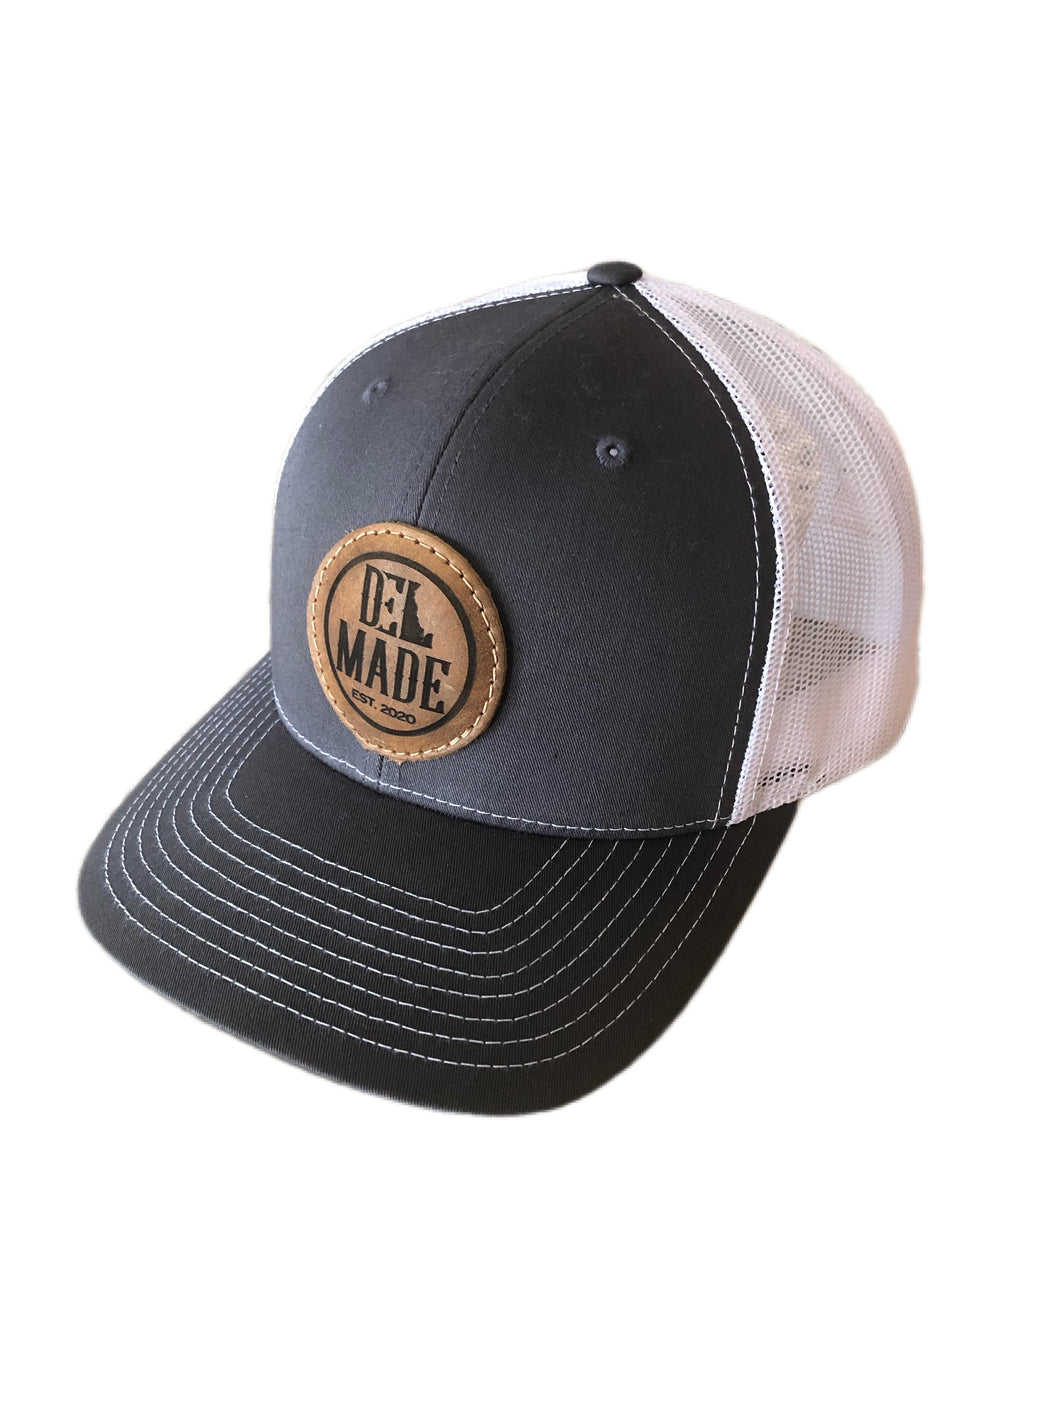 DEL Made Leather Patch Snapback